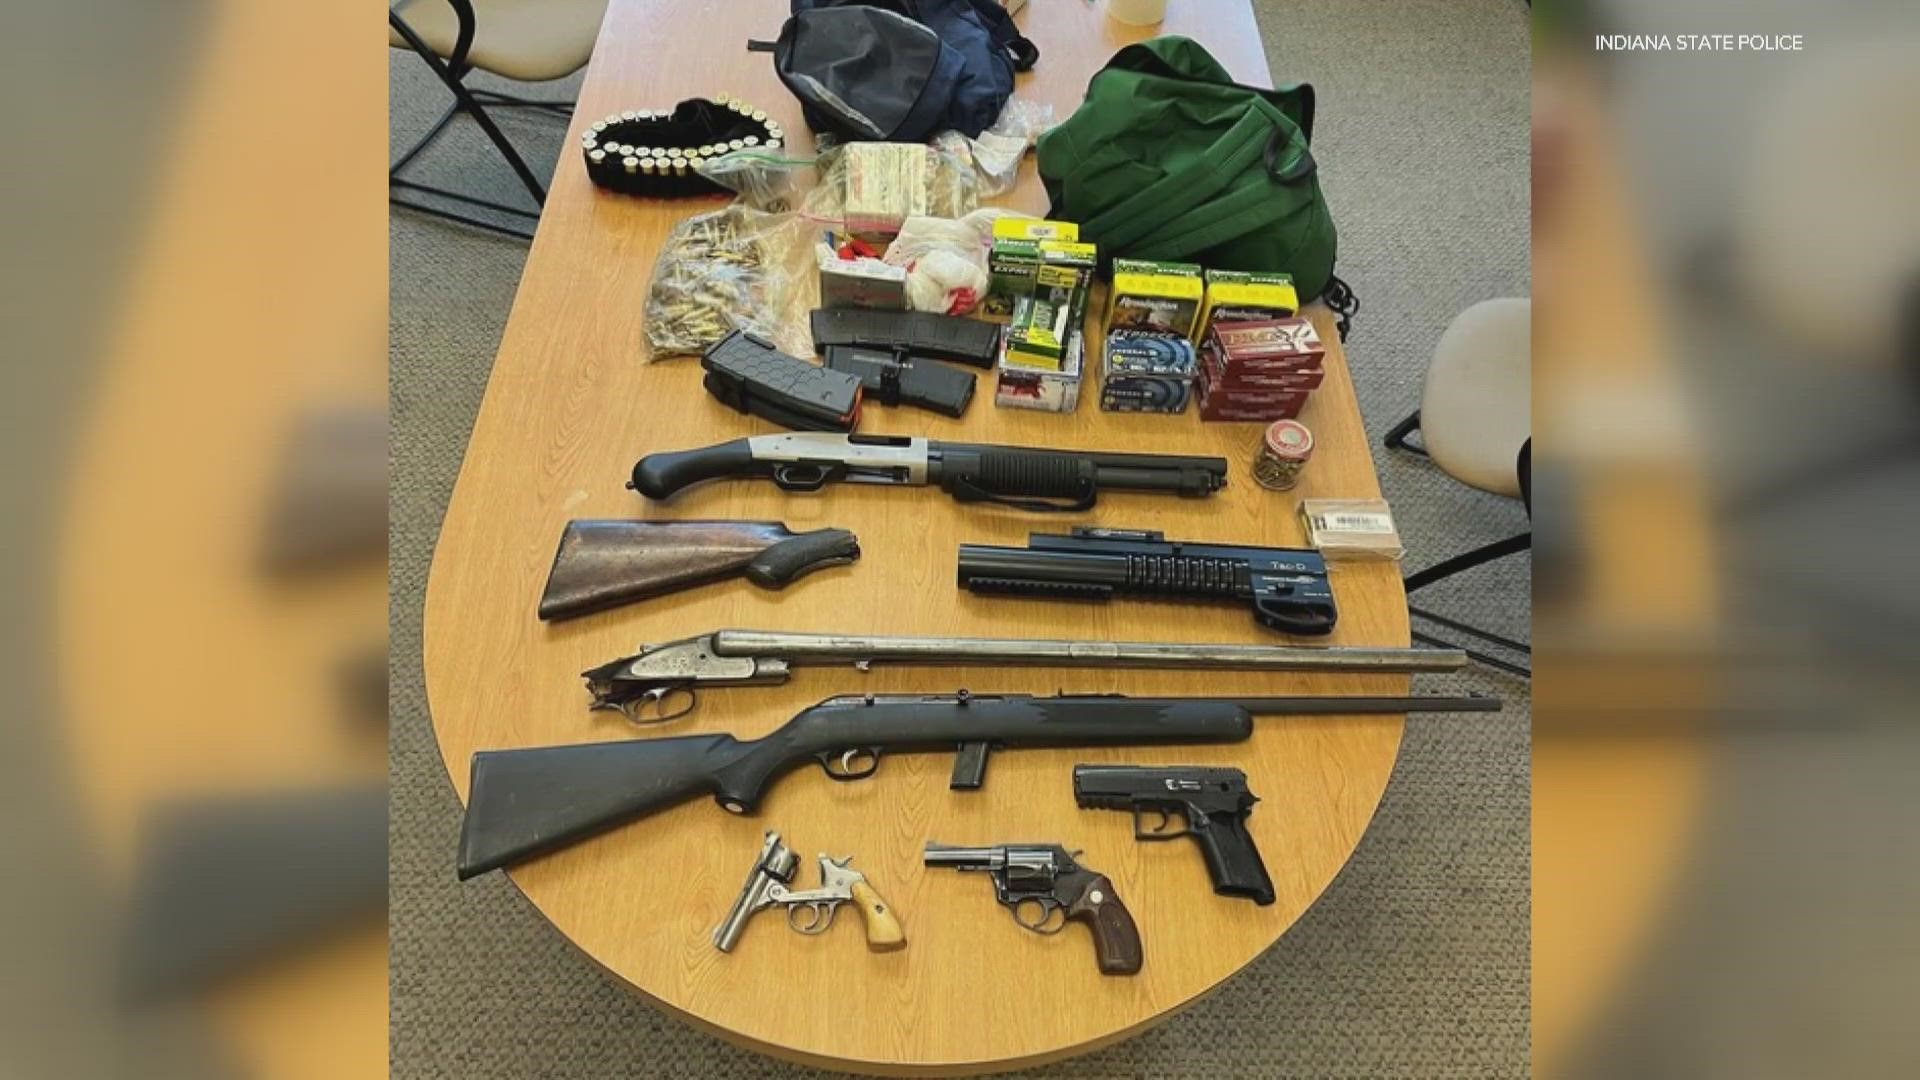 Police are releasing photos of a stockpile of weapons found after a chase ends on the interstate.